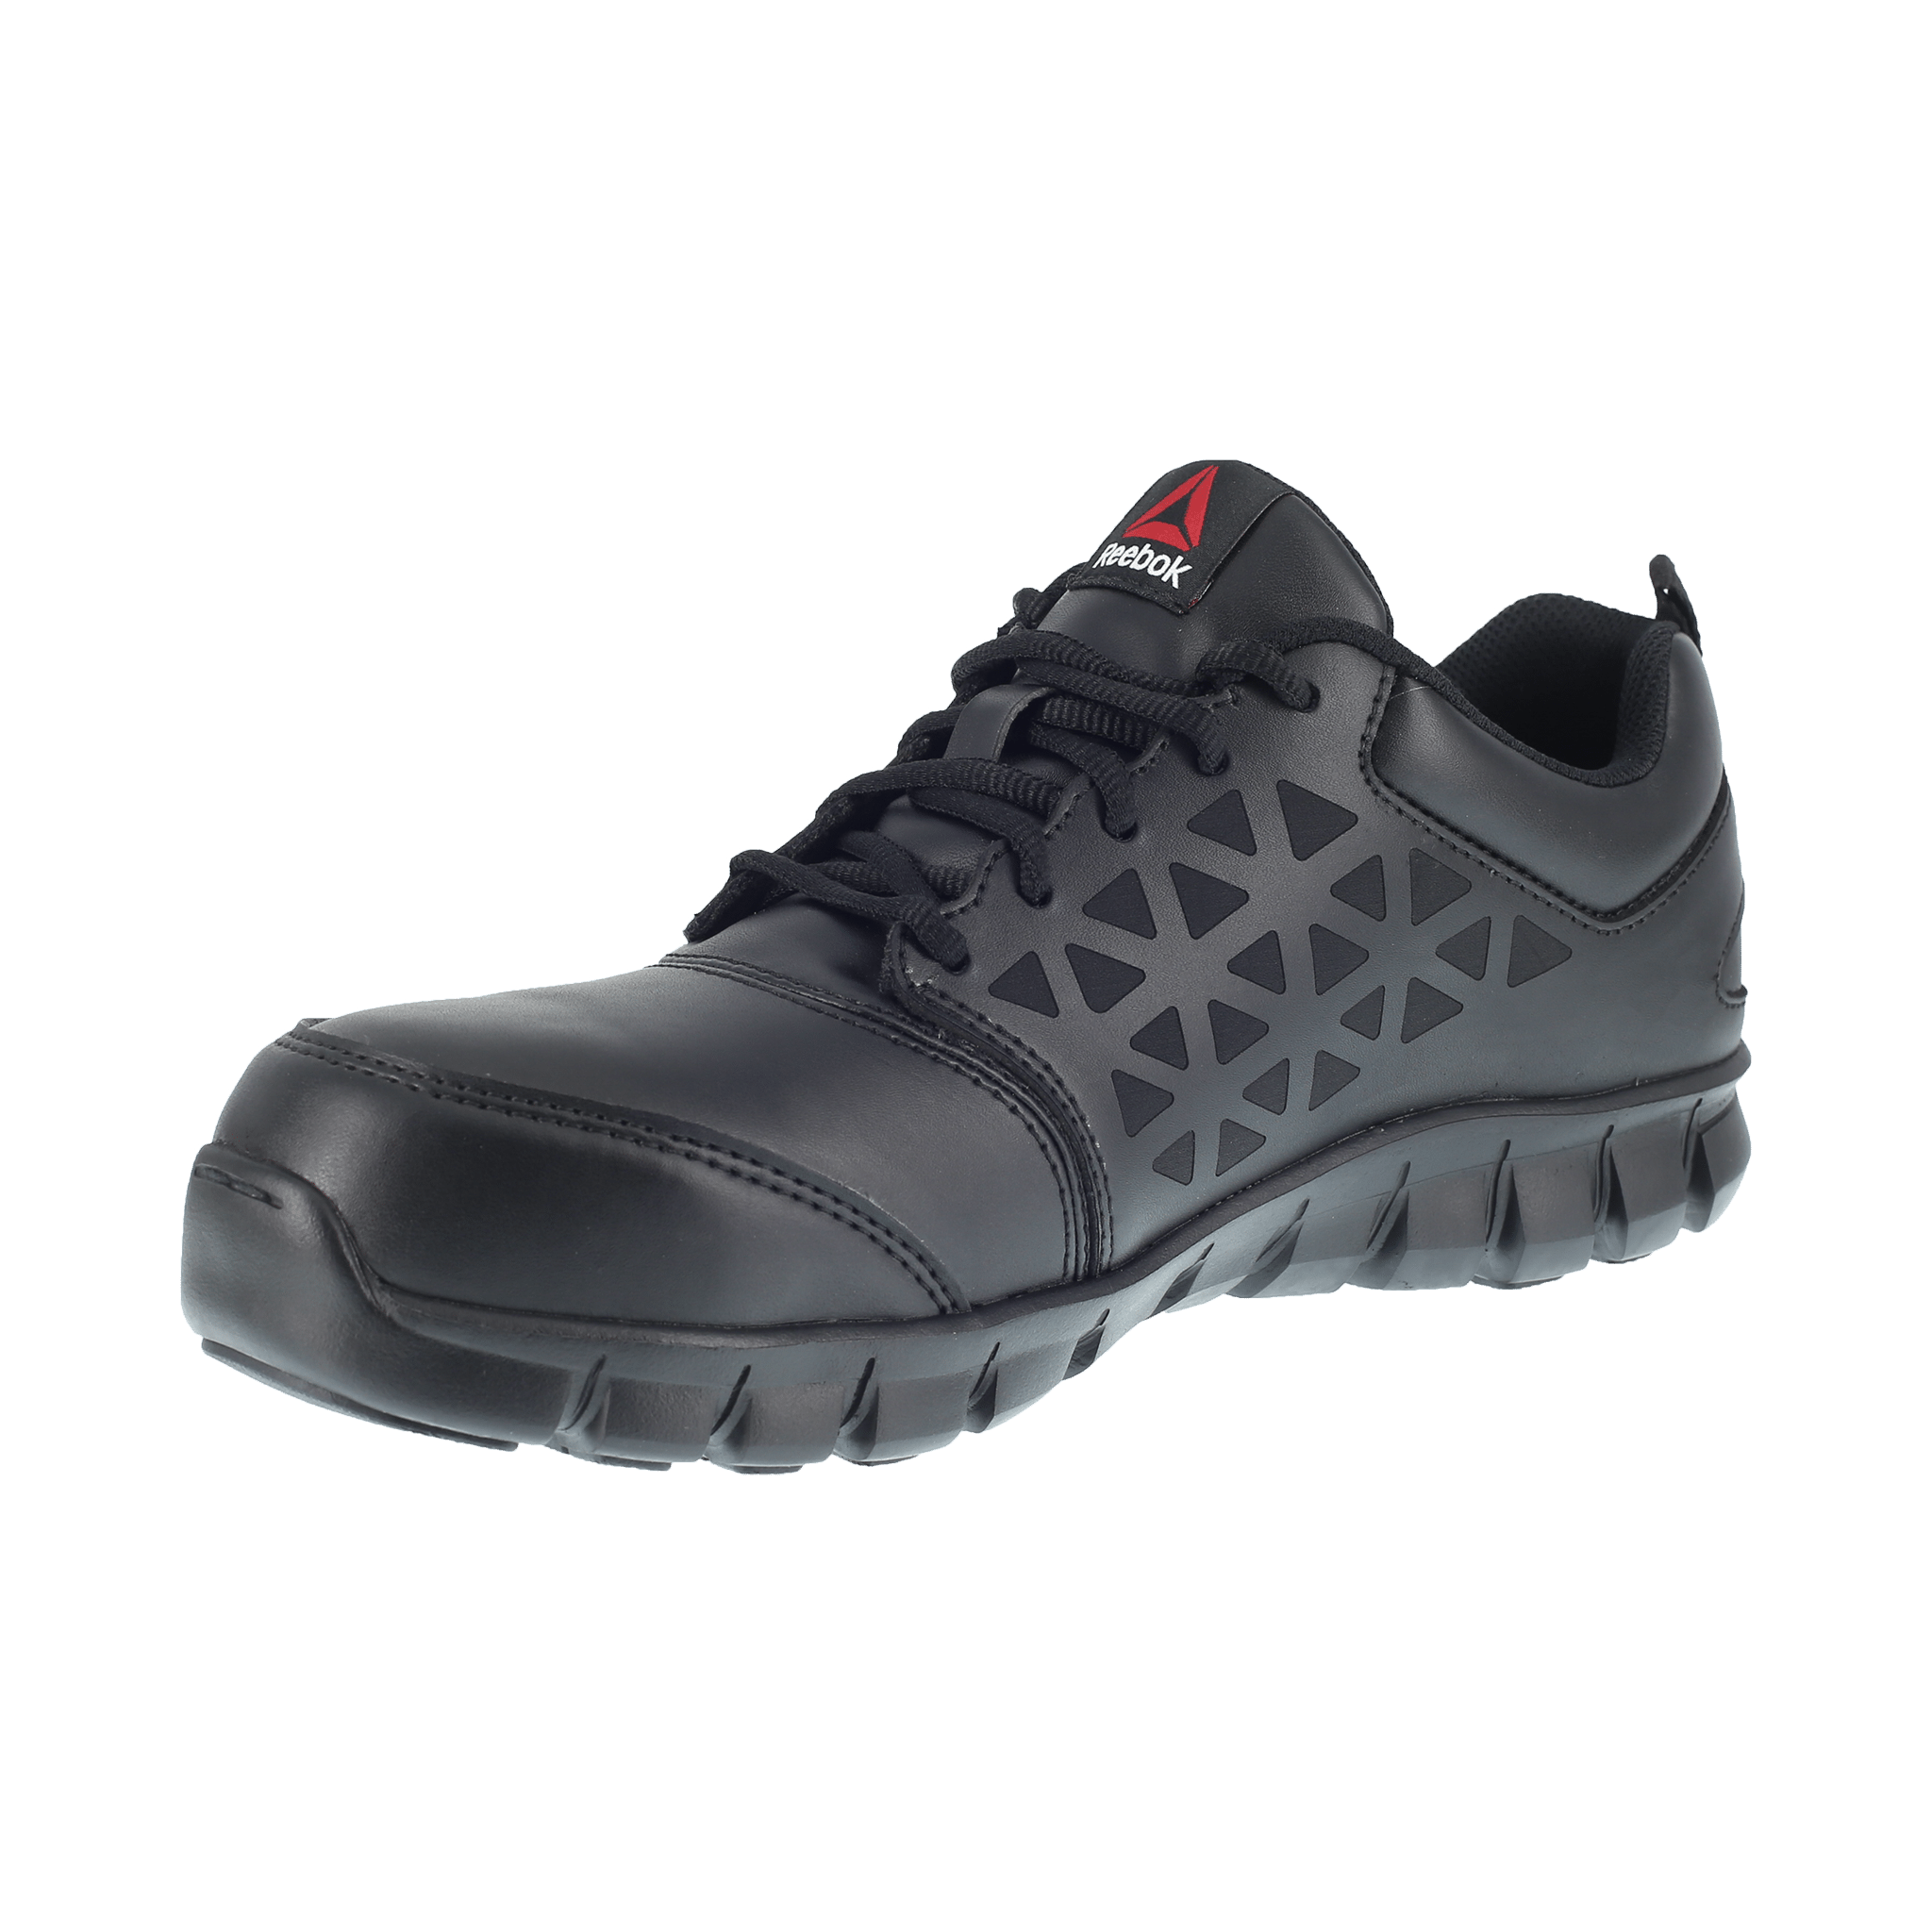 Reebok Men's Sublite Cushion Work Athletic Oxford - RB4047 – Security ...